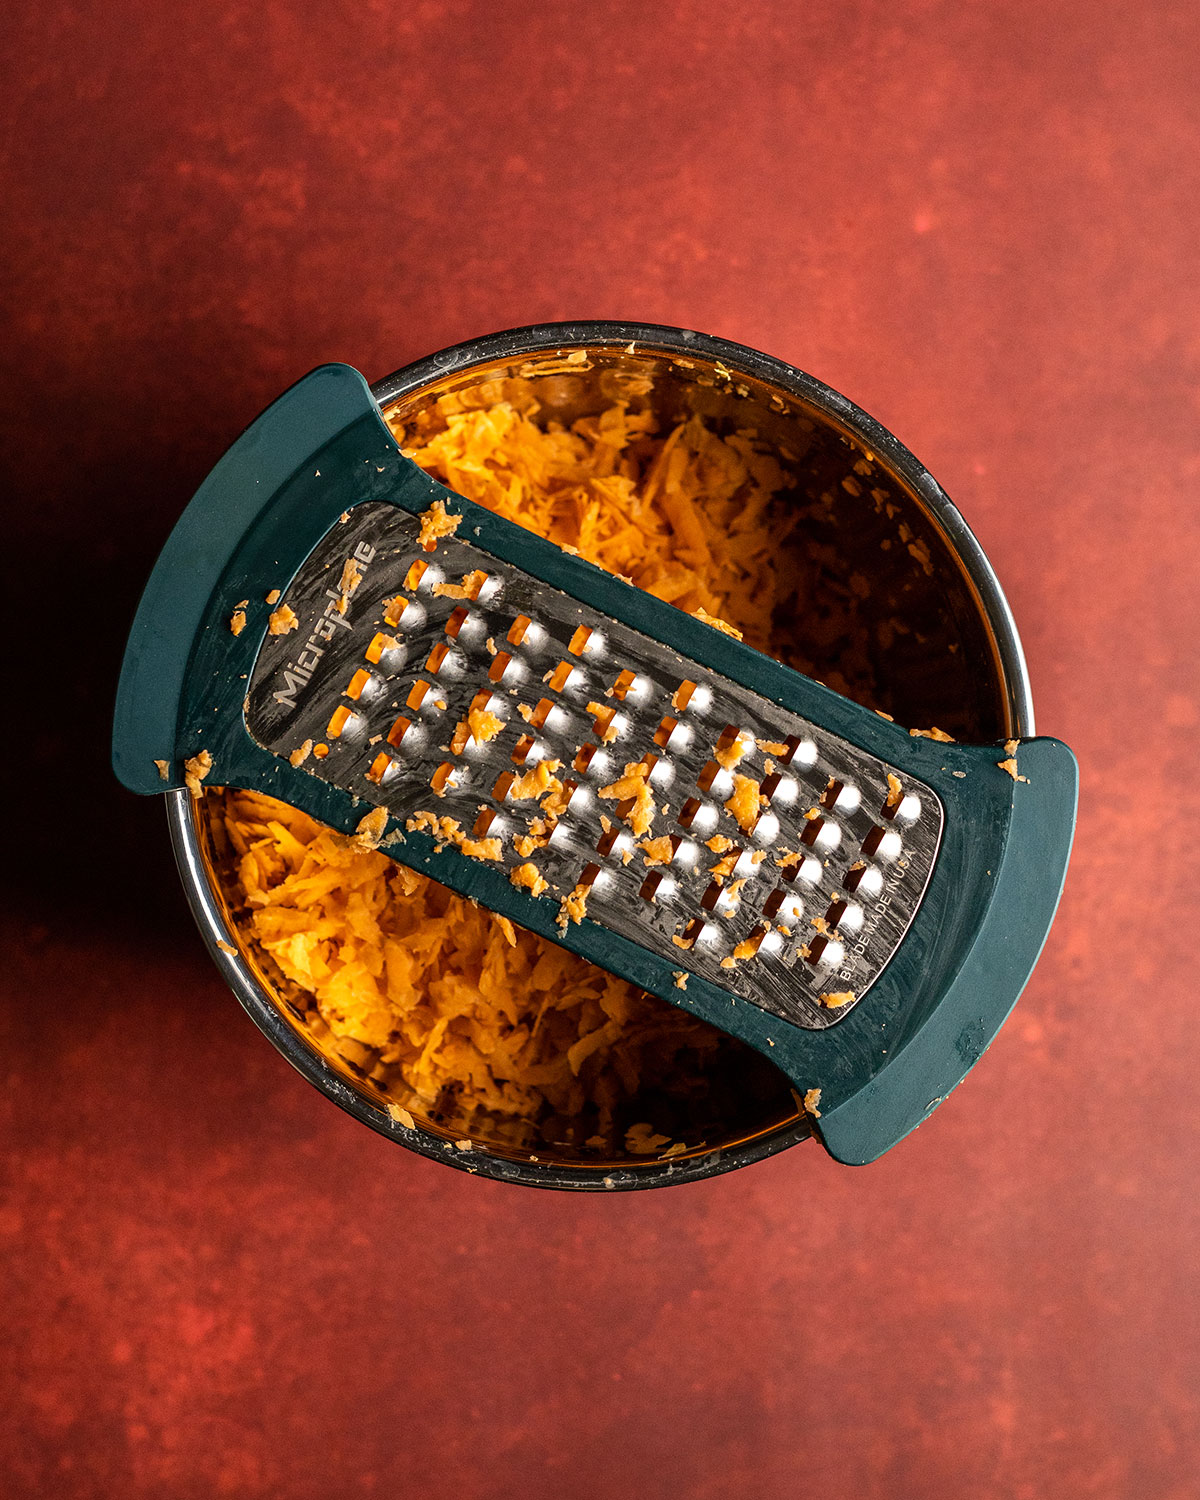 the bowl filled with sweet potato shreds and the bowl grater sitting on top